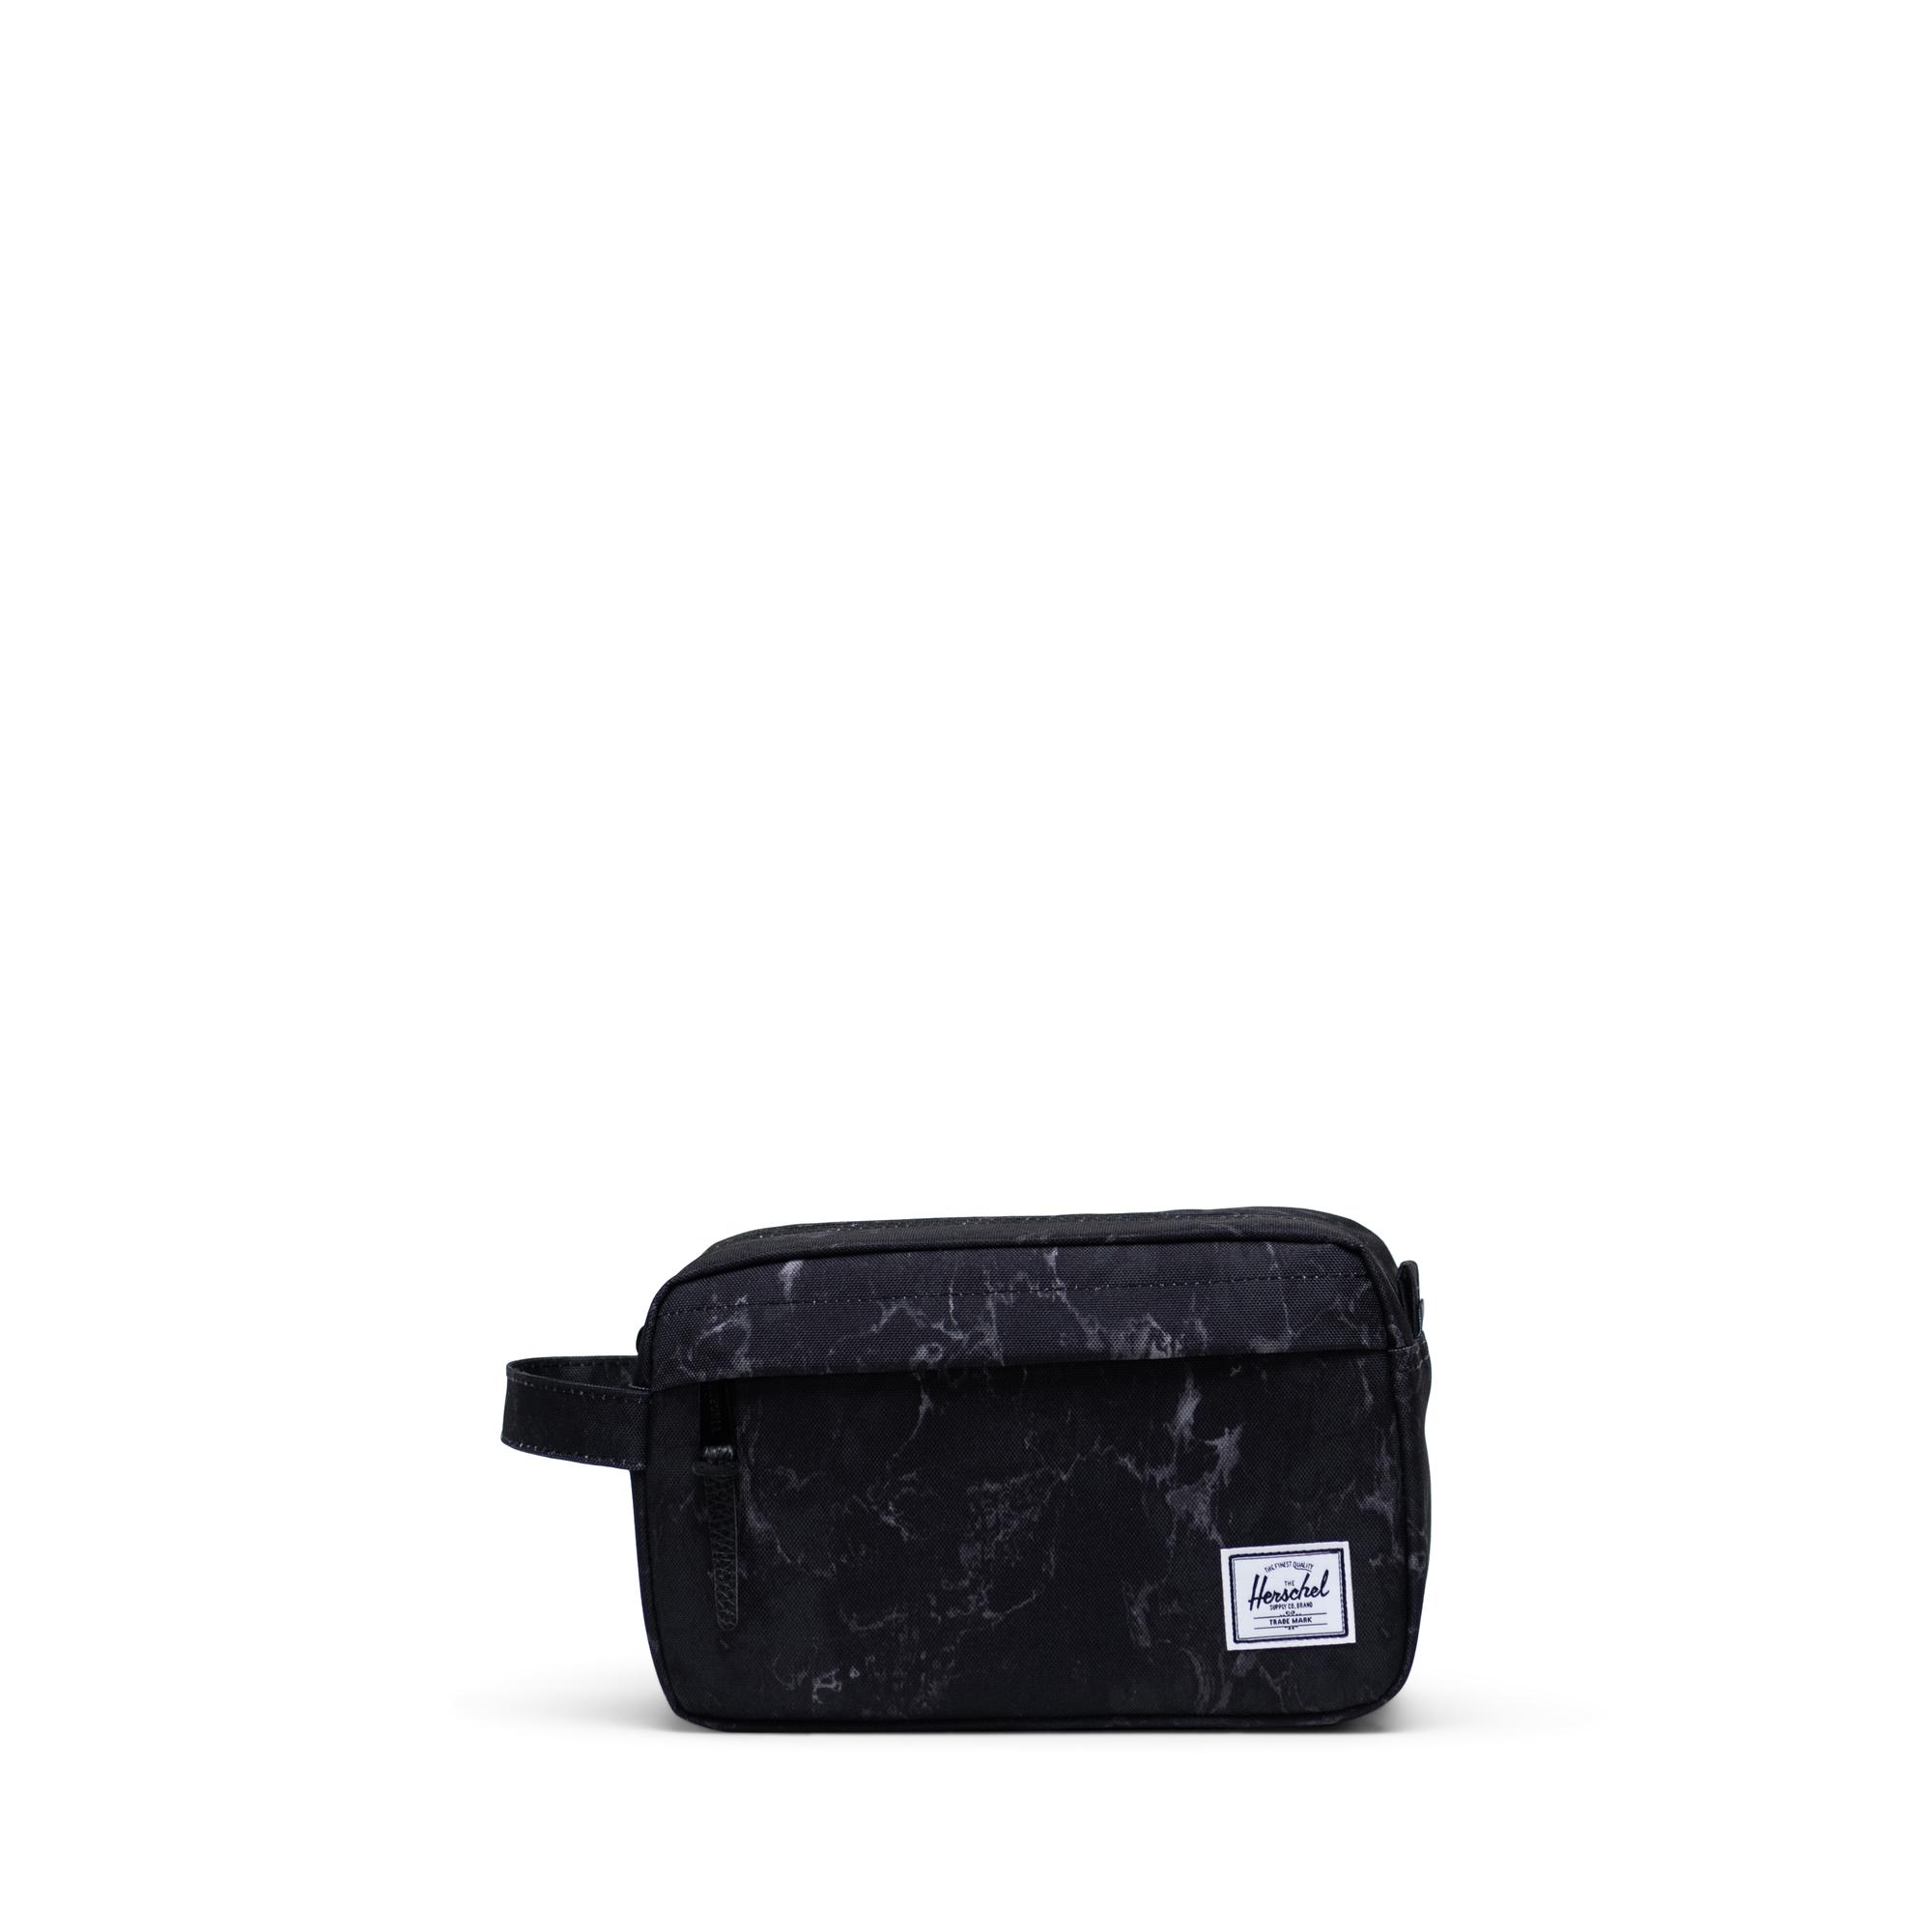 Luggage | Hard and Soft Shell Cases | Herschel Supply Company